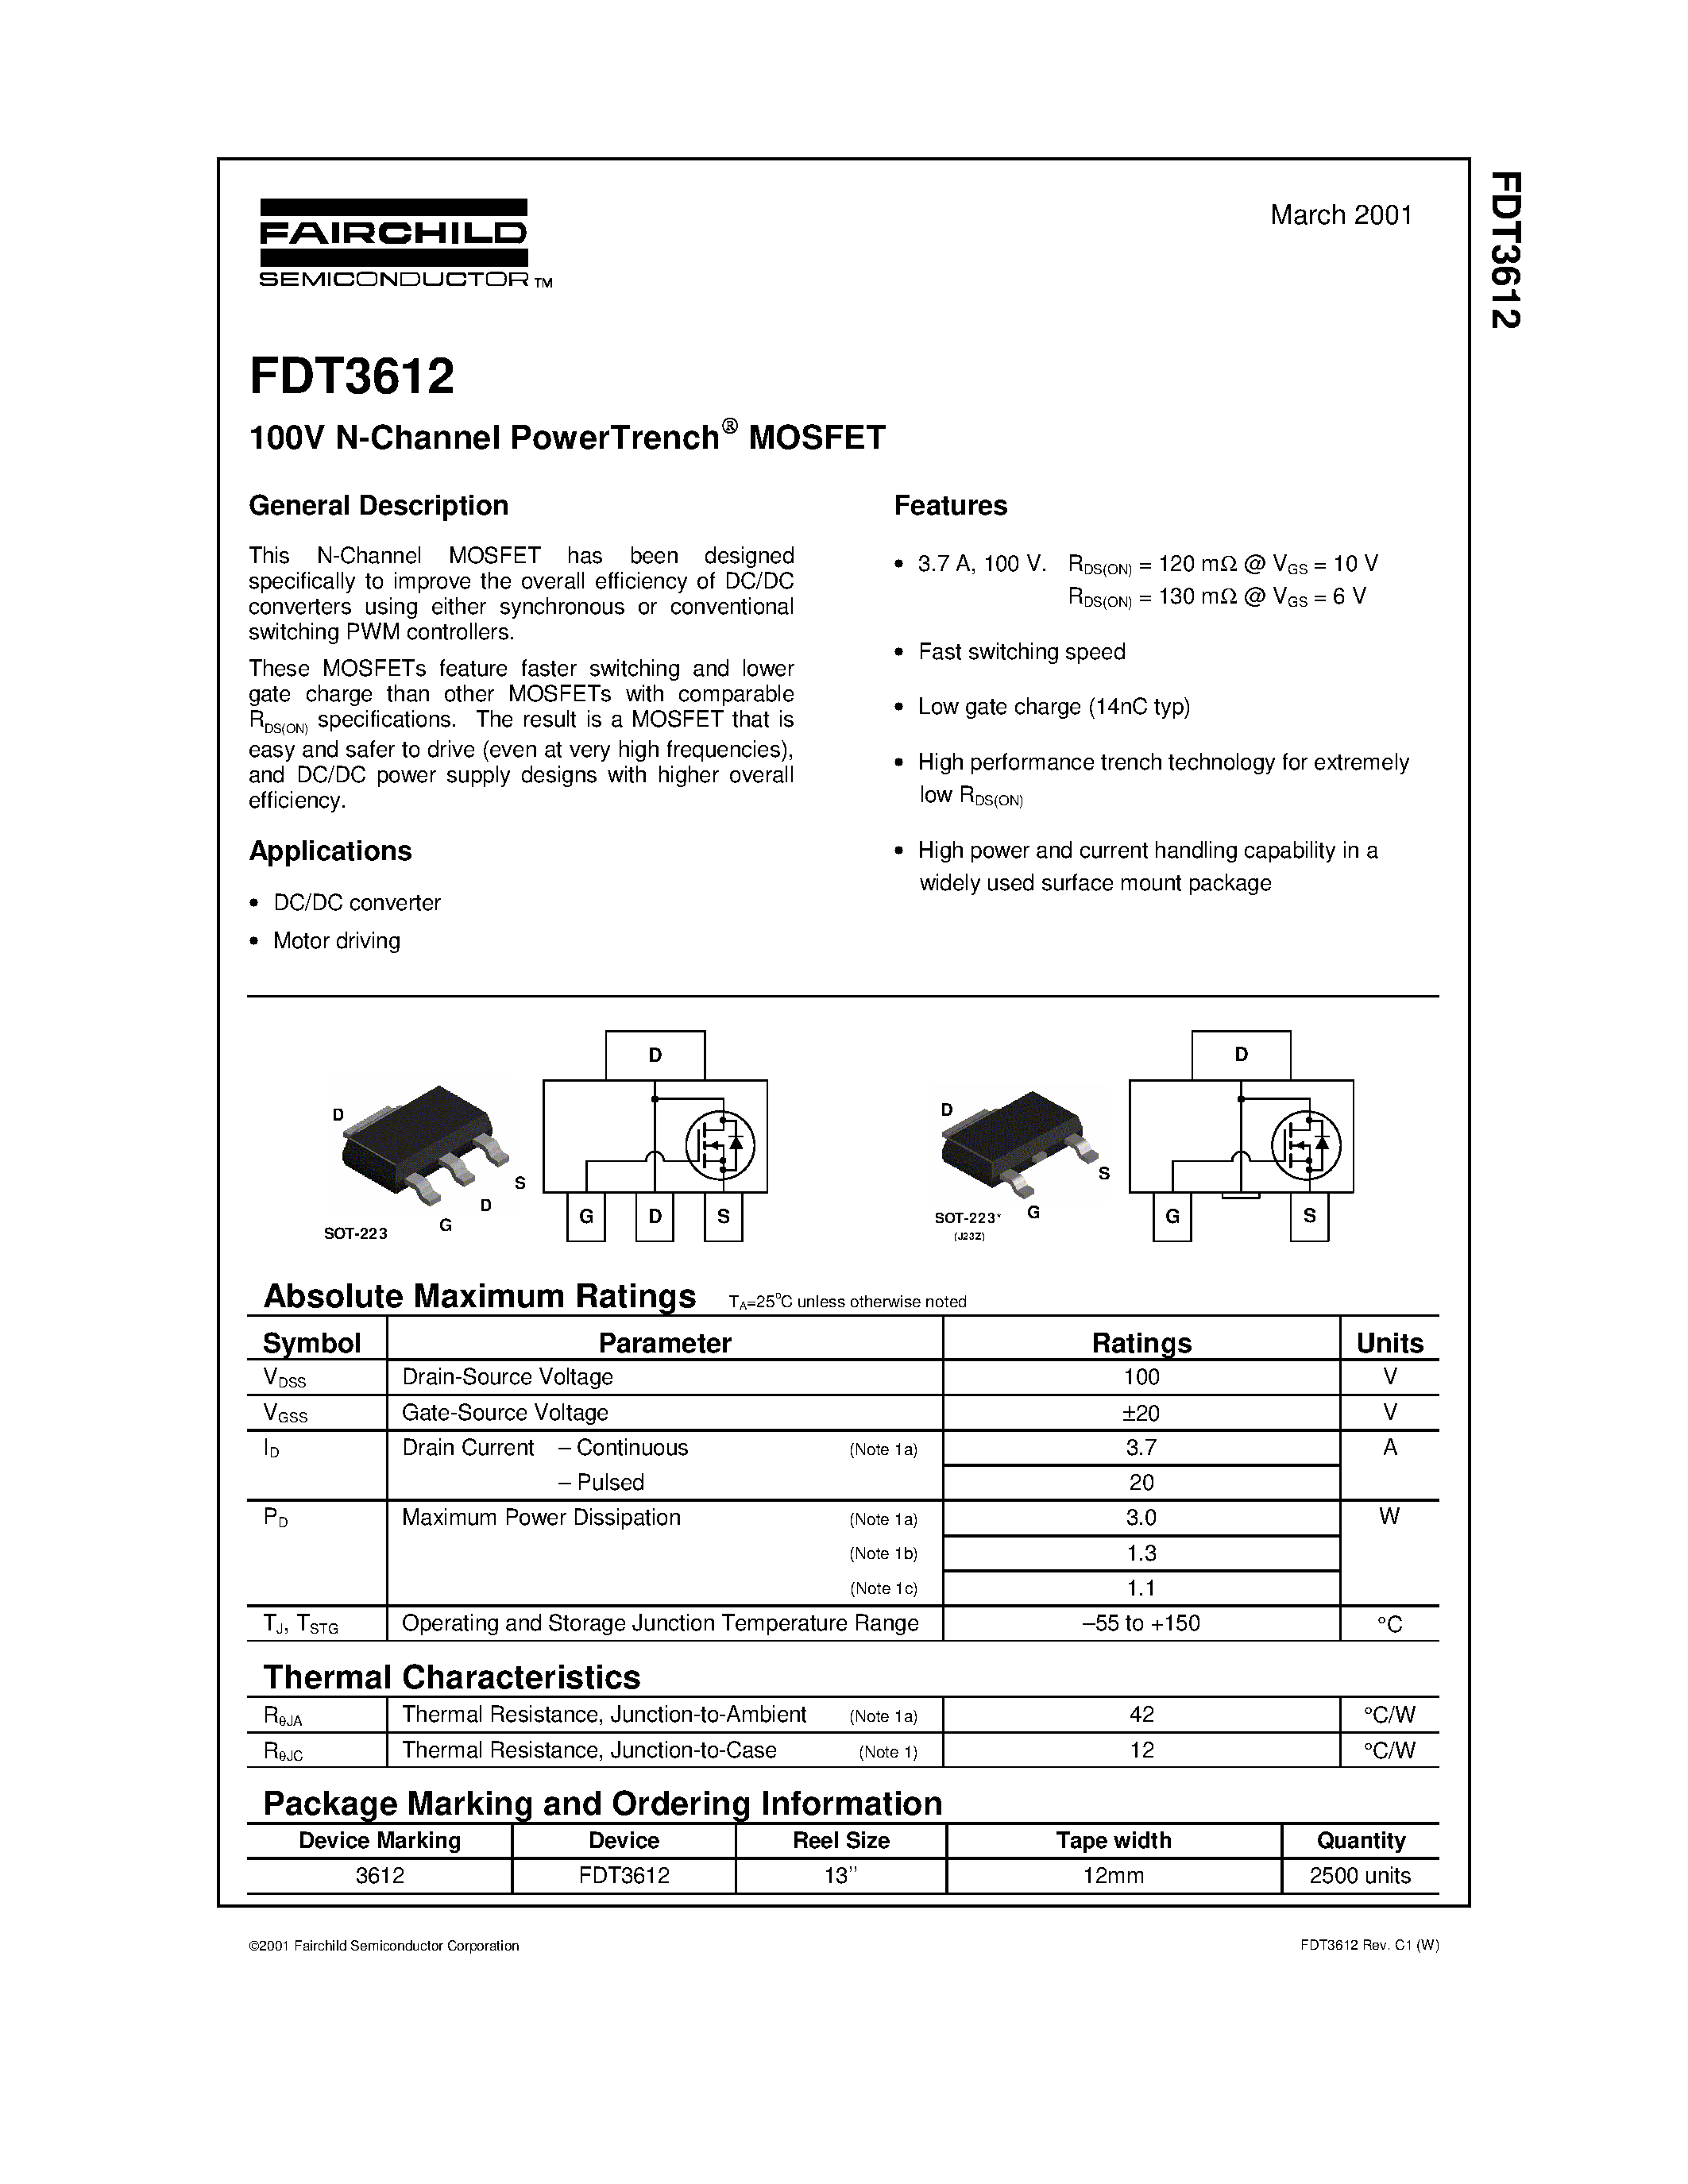 Datasheet FDT3612 - 100V N-Channel PowerTrench MOSFET page 1